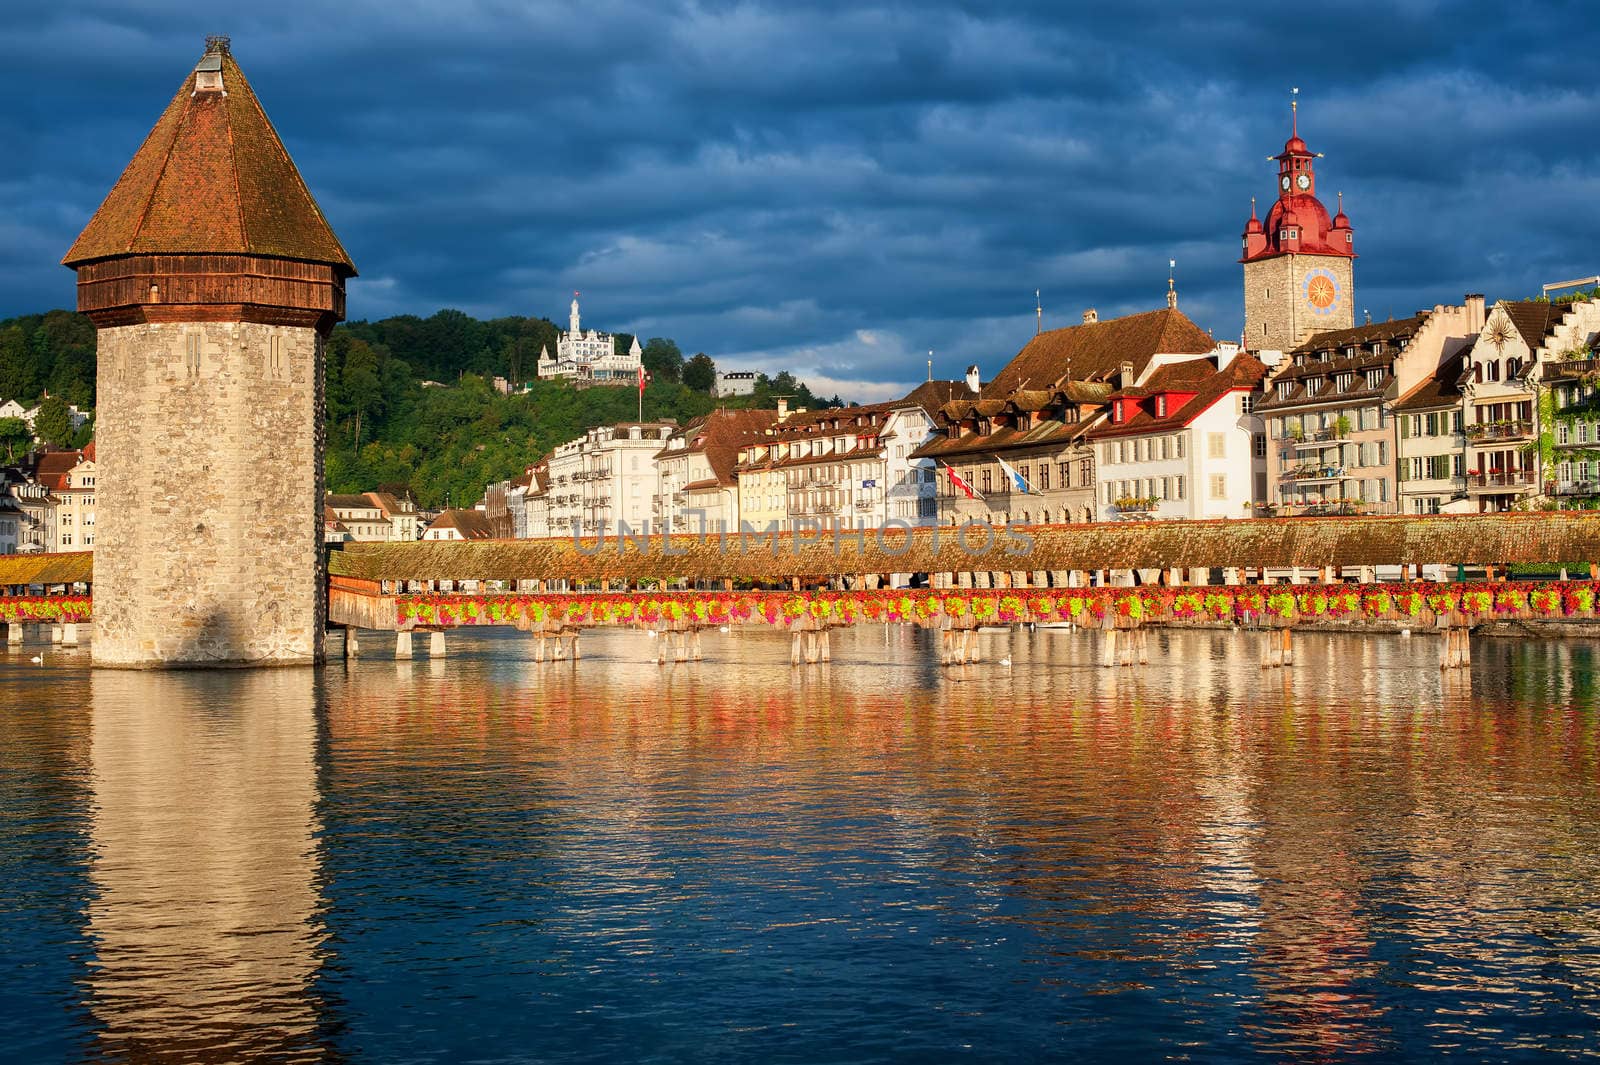 Lucerne, Switzerland, view over the old town with Chapel Bridge, by GlobePhotos